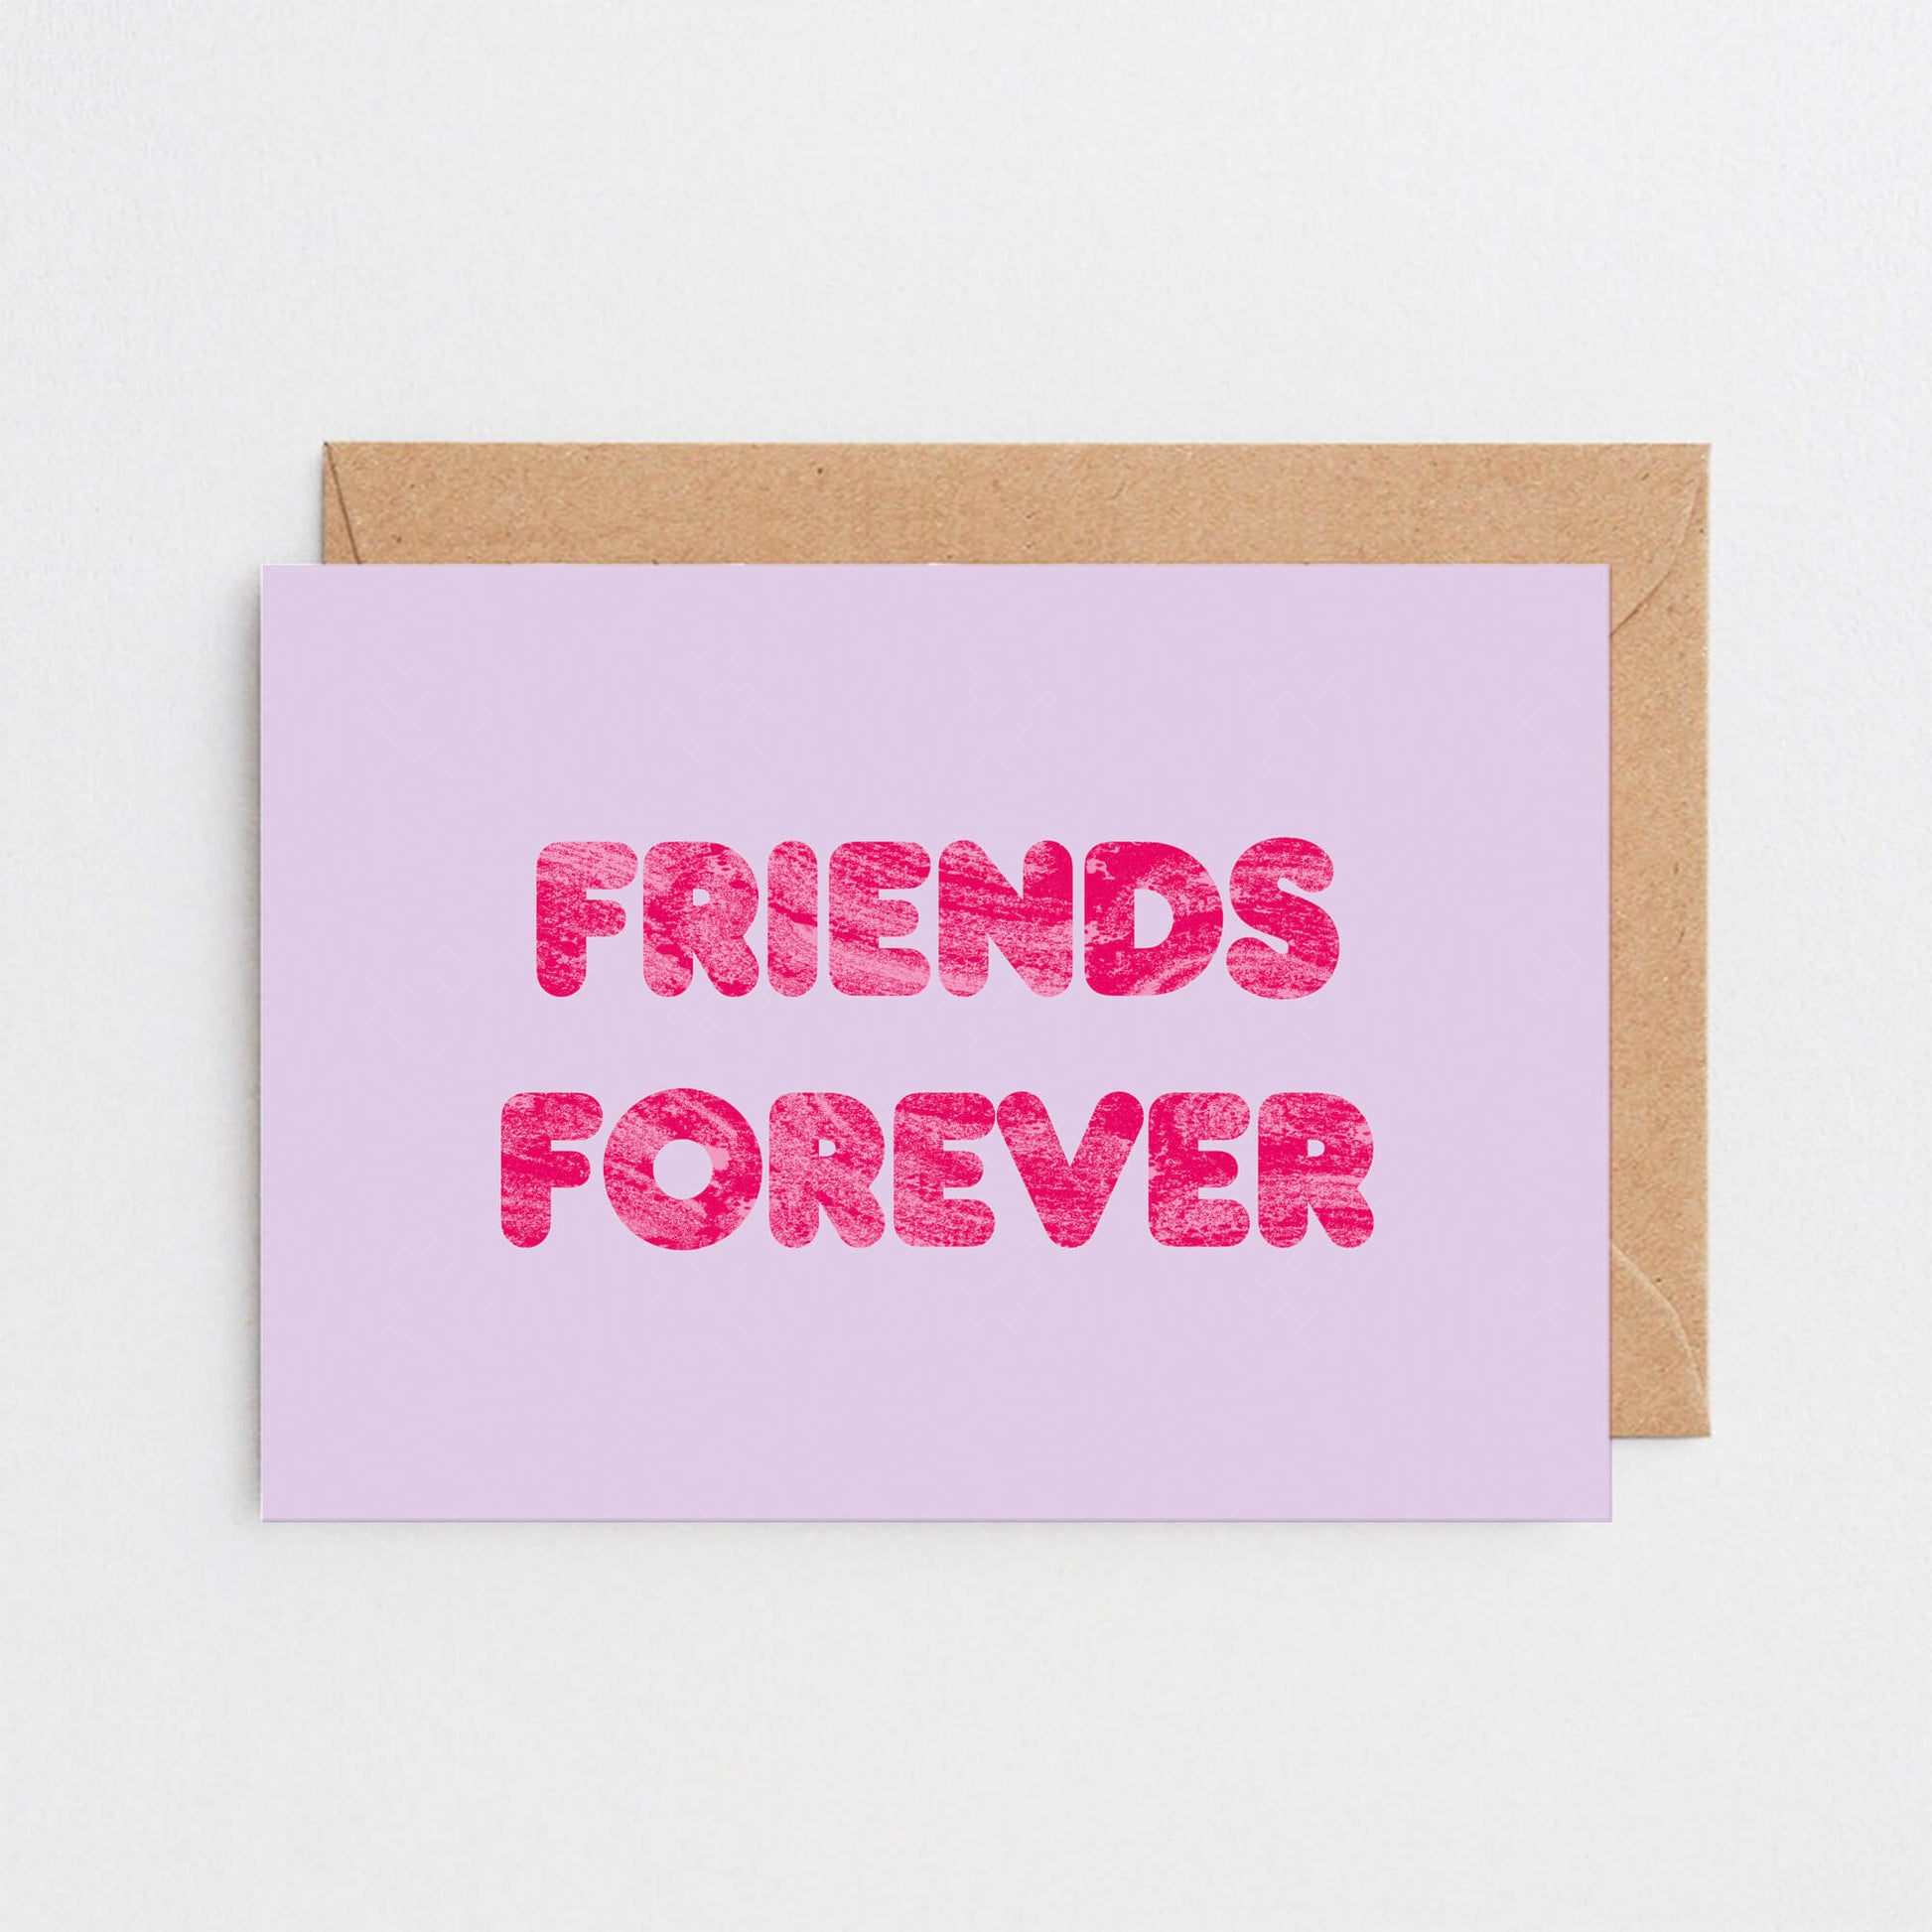 Friends Forever Card by SixElevenCreations. Product Code SE5108A6